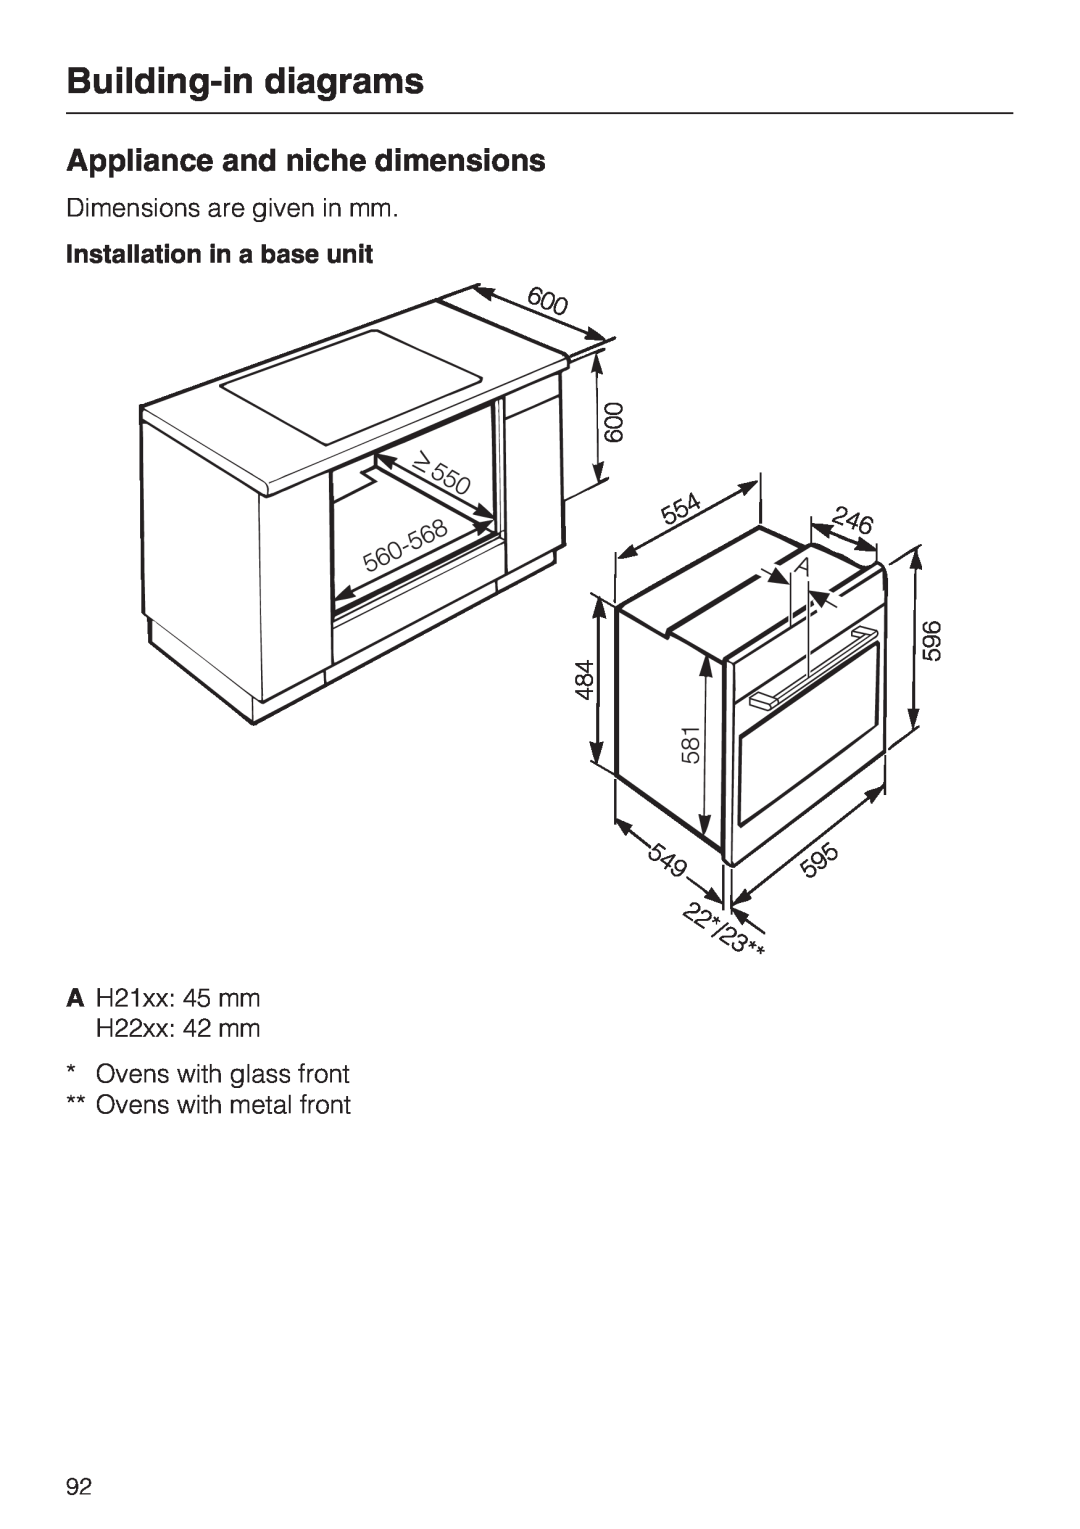 Miele 10 102 470 installation instructions Building-indiagrams, Appliance and niche dimensions, Installation in a base unit 